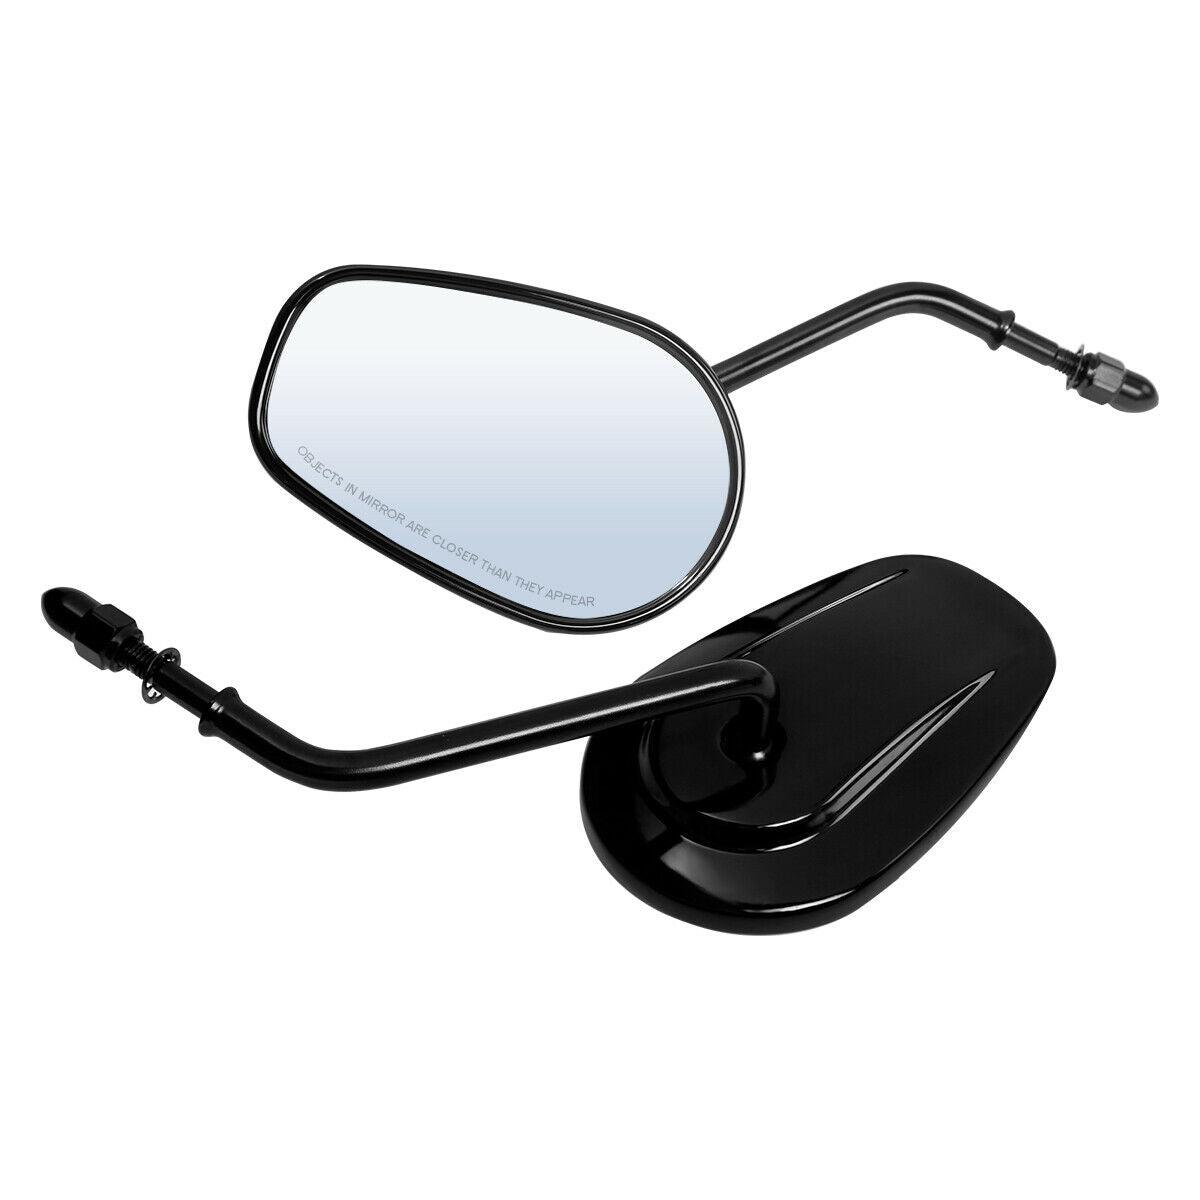 Black L & R Rear View Mirrors For Harley Road King Touring XL 883 SPORTSTER New - Moto Life Products